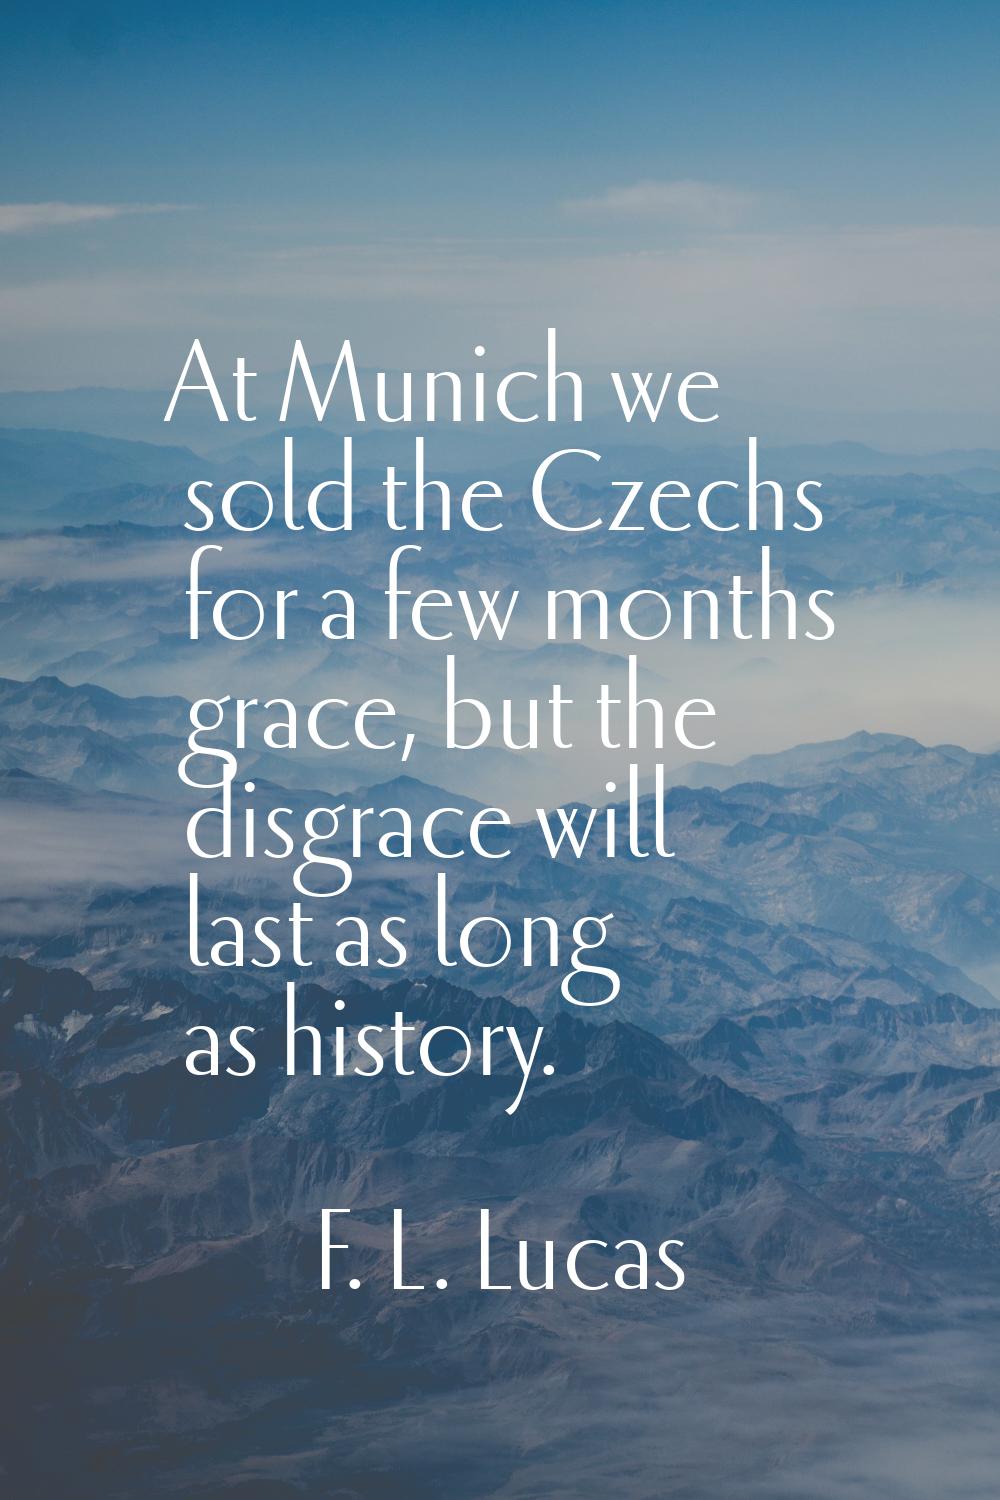 At Munich we sold the Czechs for a few months grace, but the disgrace will last as long as history.